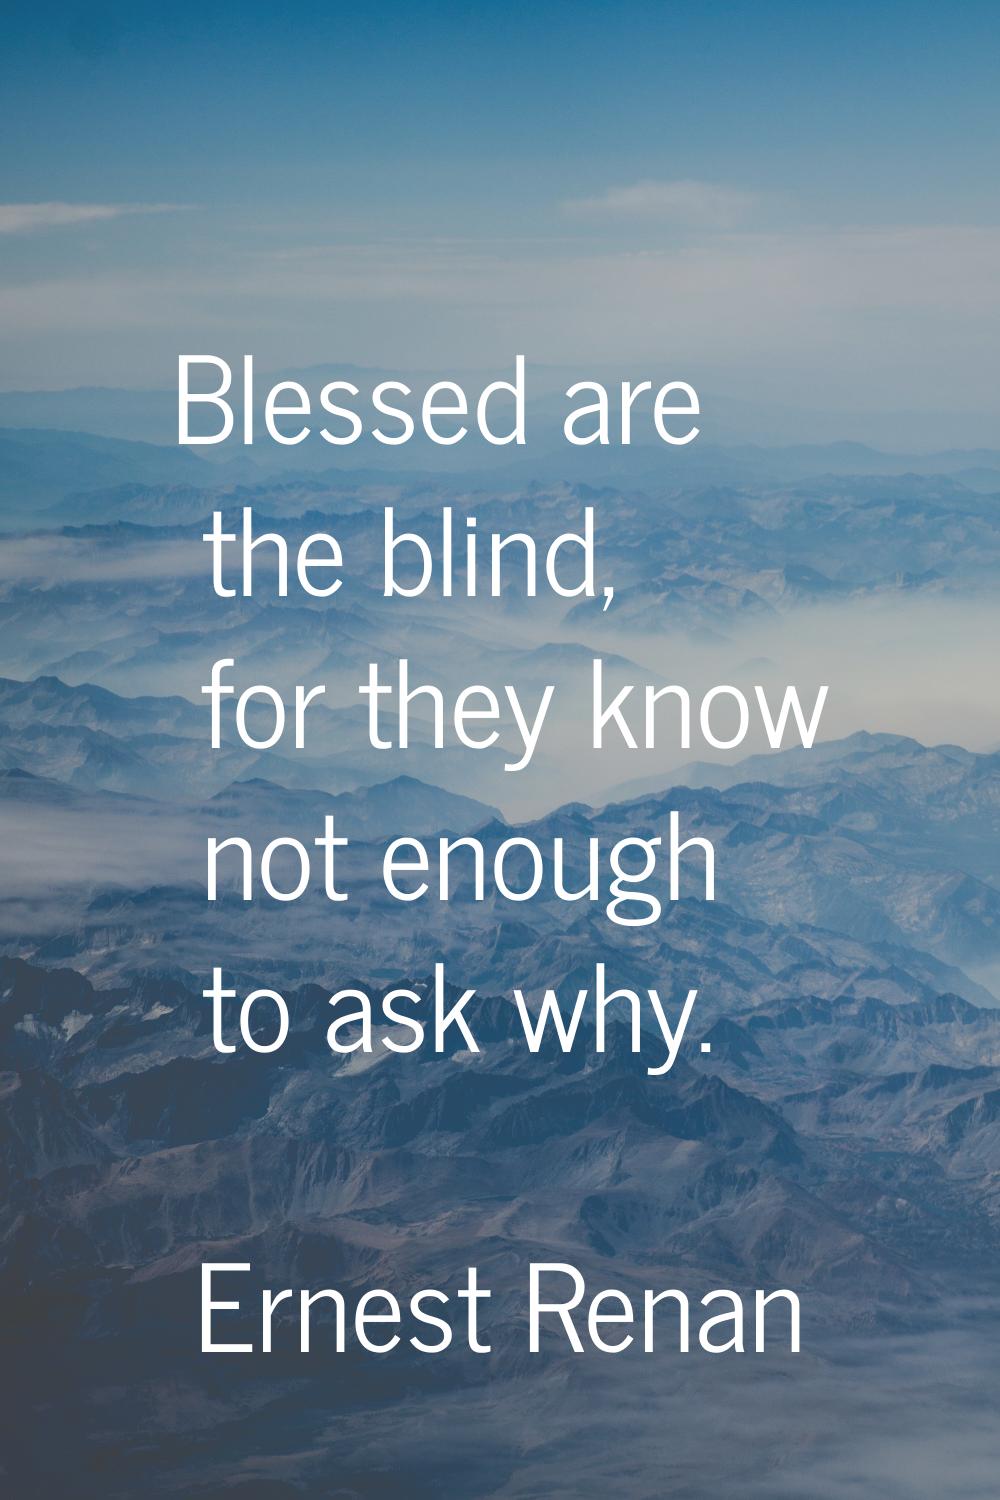 Blessed are the blind, for they know not enough to ask why.